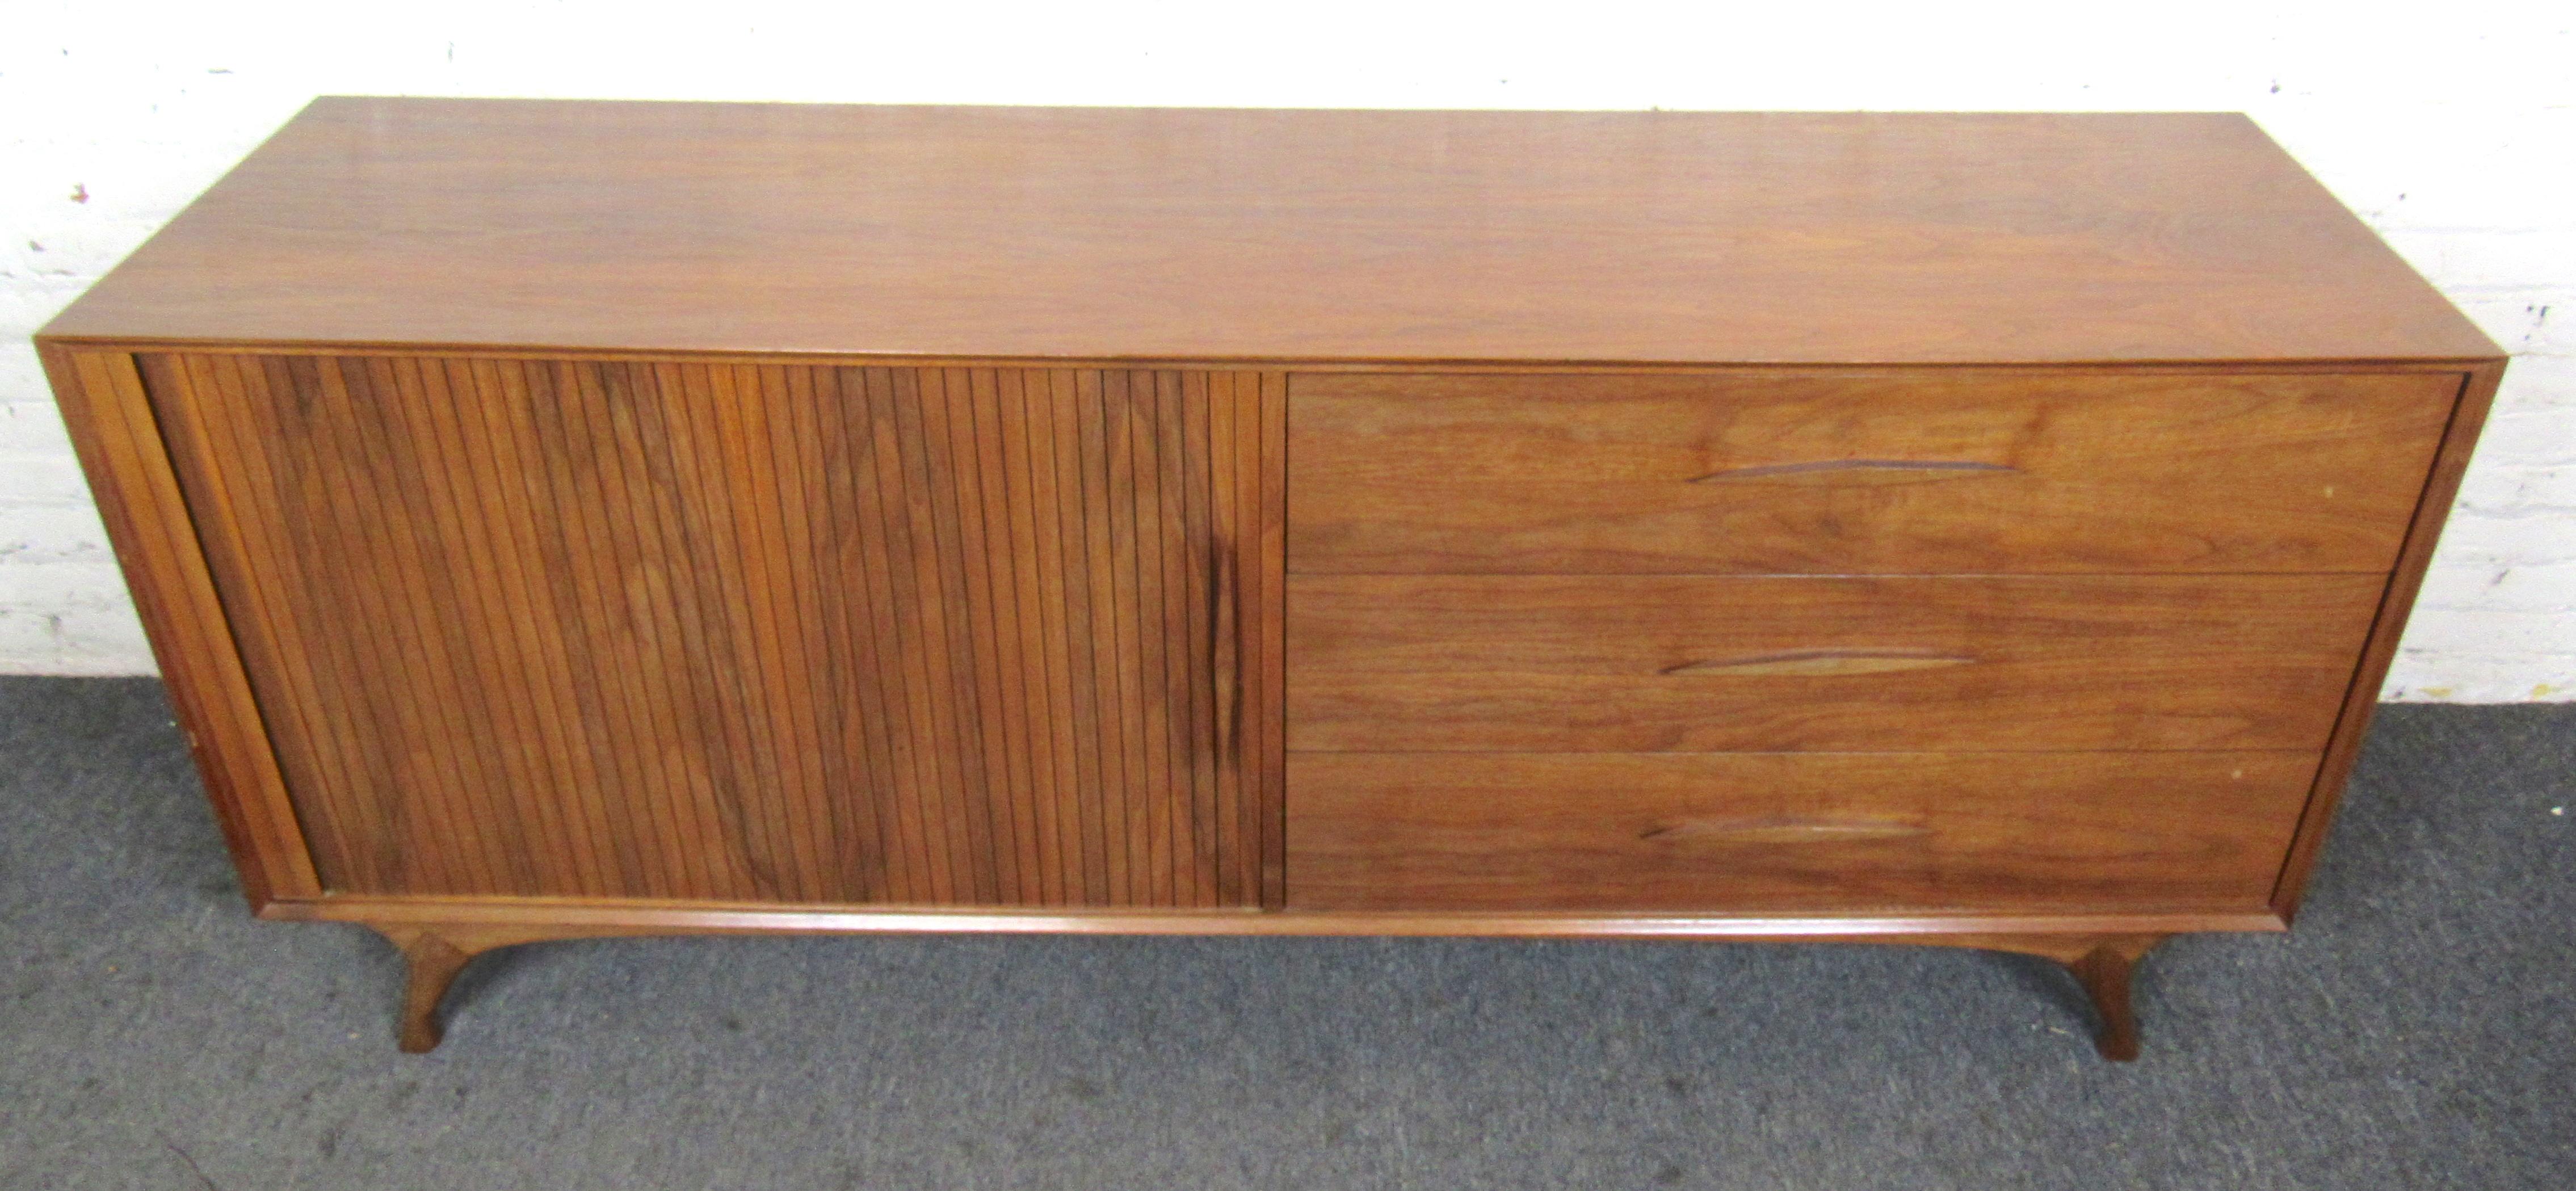 Unique Mid-Century Modern cabinet with tambour door that reveals cabinet storage and three wide drawers. Complete with sculpted wood handles and legs.
(Please confirm location NY or NJ).